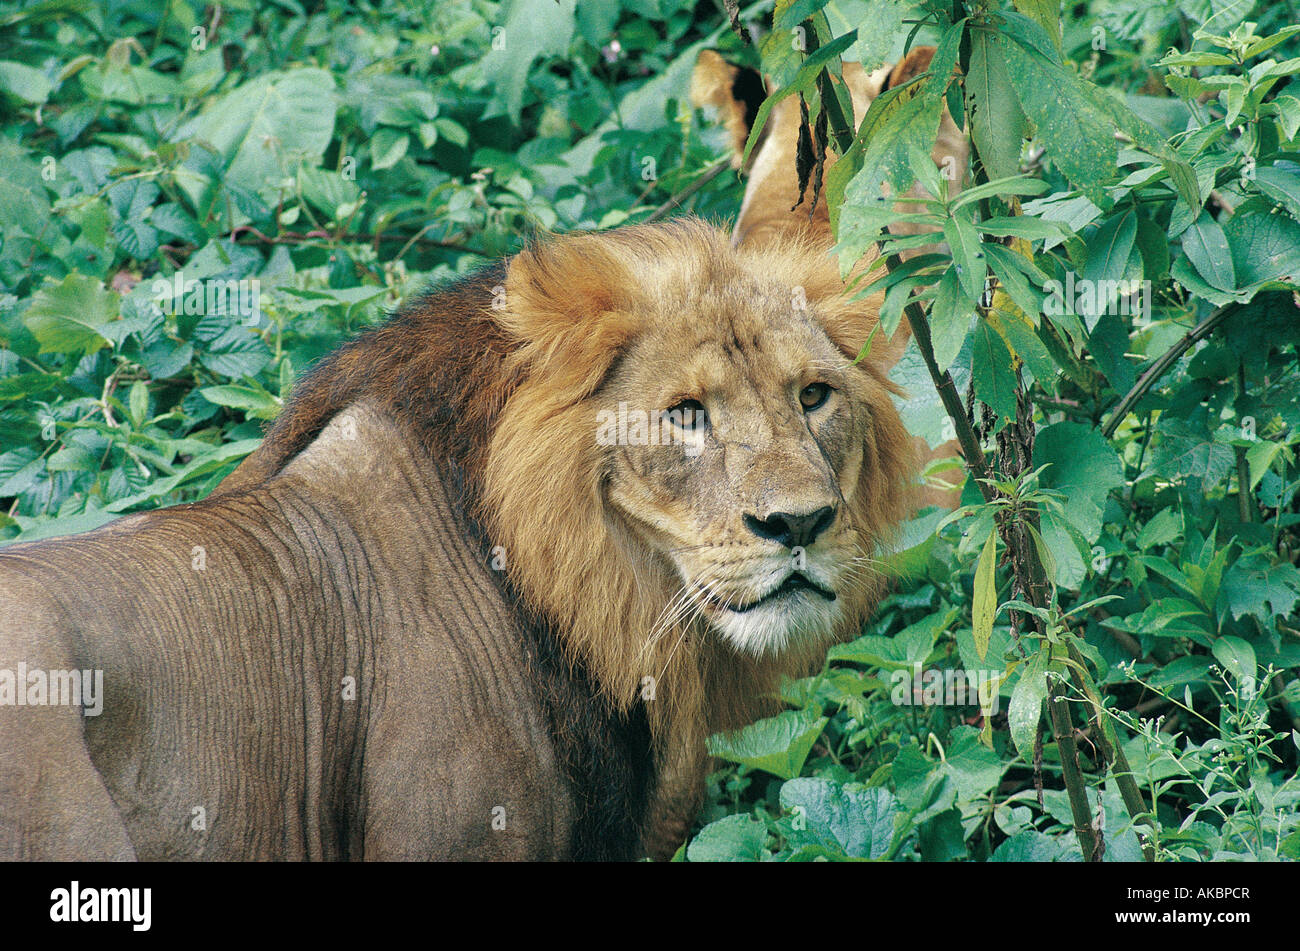 Close up portrait of mature male lion in Harenna Forest Bale Mountains National Park Ethiopia Africa Stock Photo